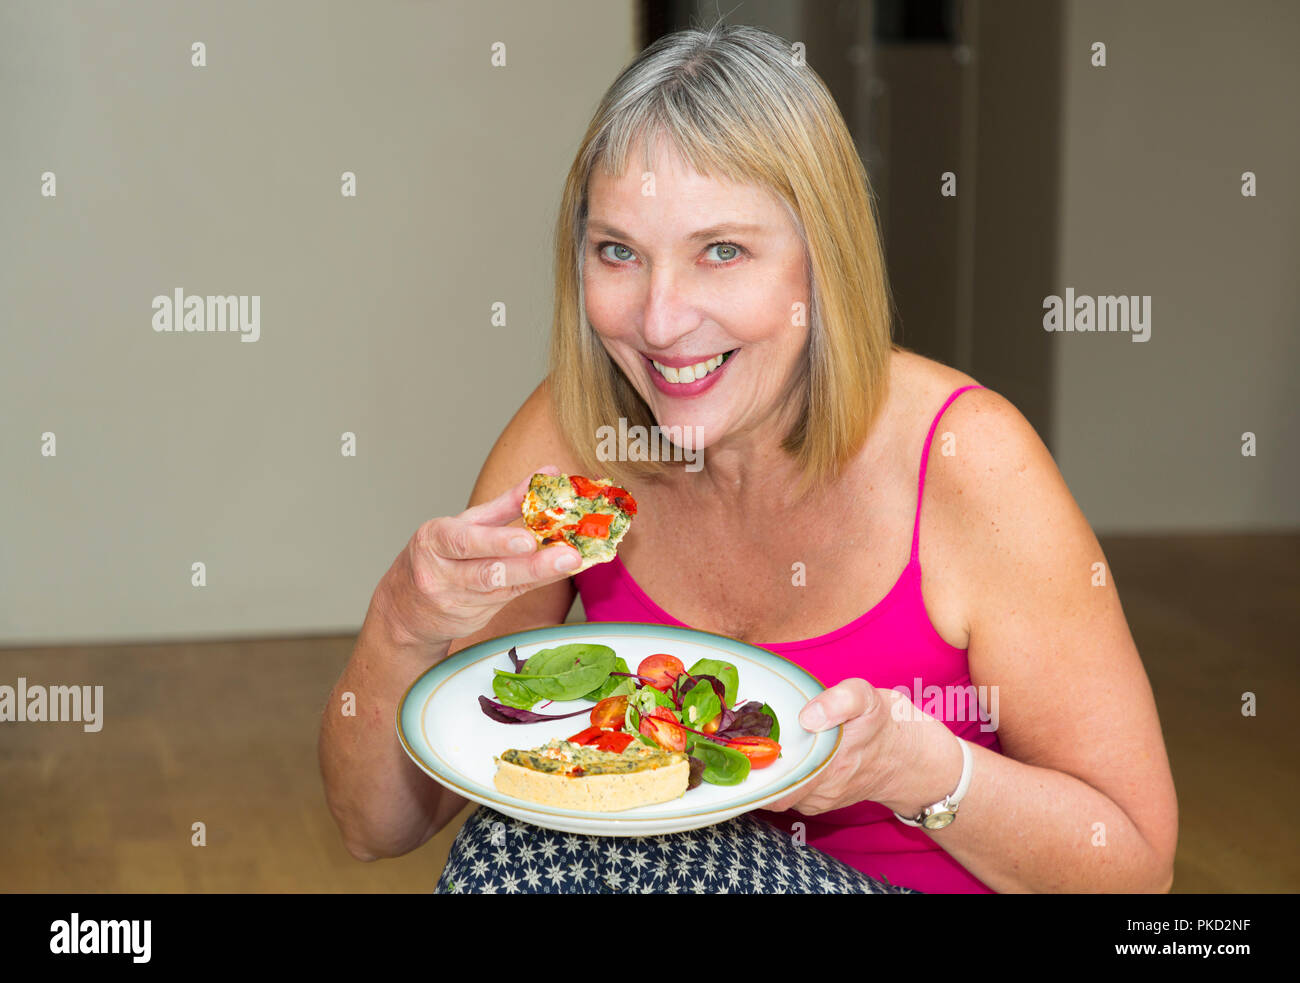 woman eating a quiche and salad meal Stock Photo